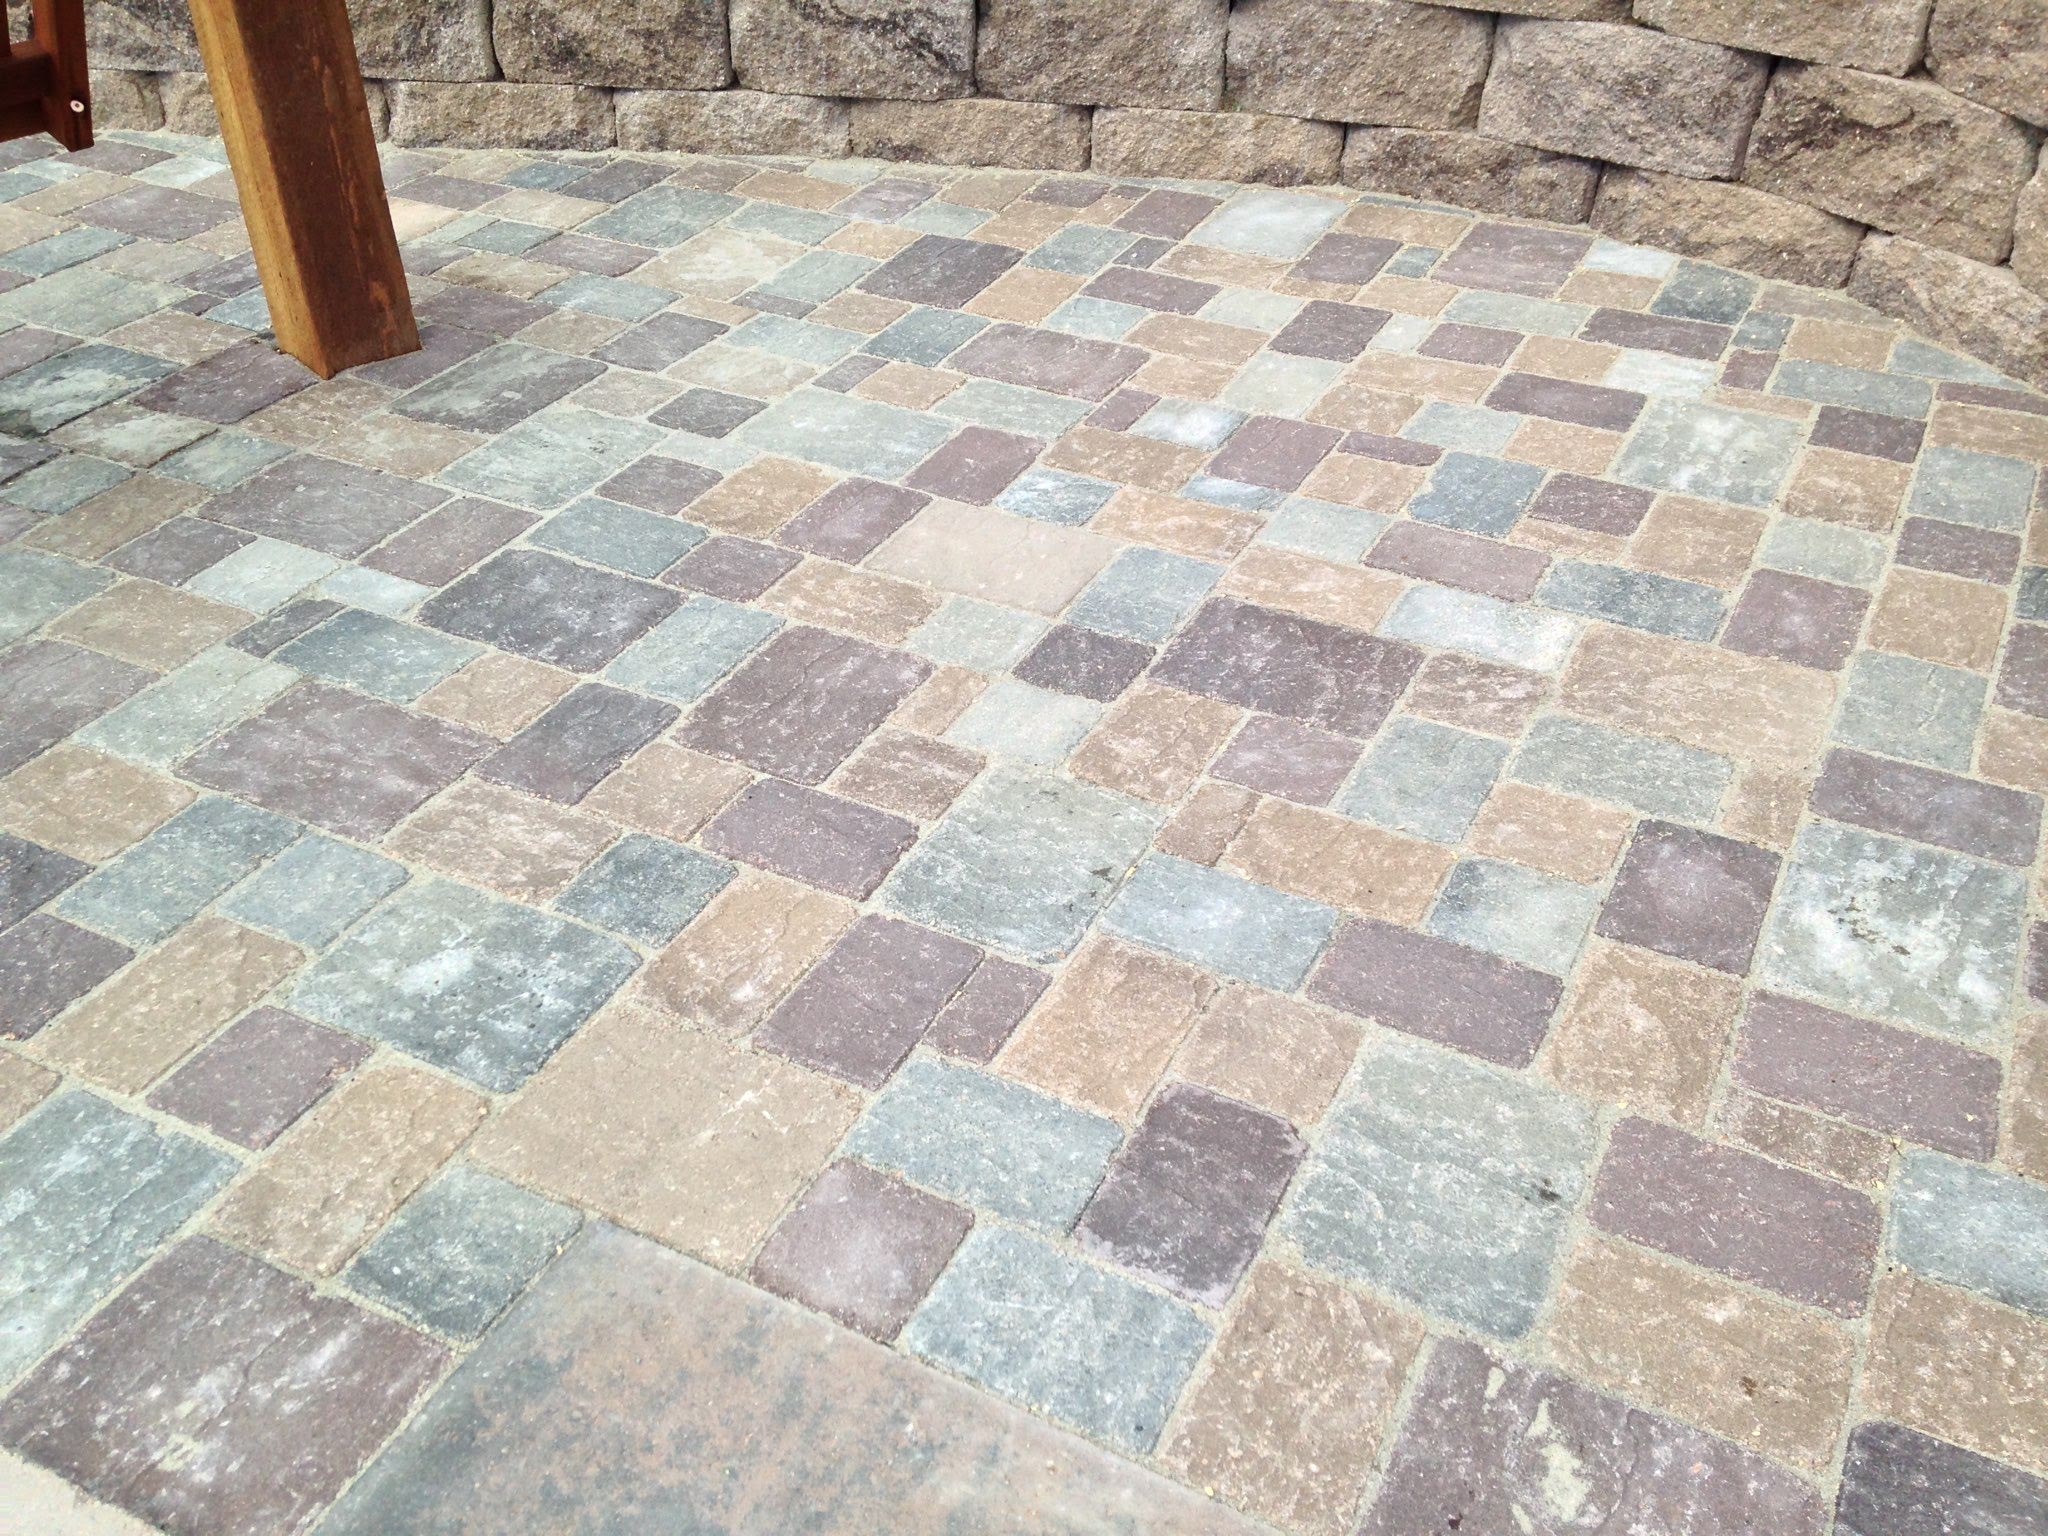 Mosaic of gray, tan, and red stone patio